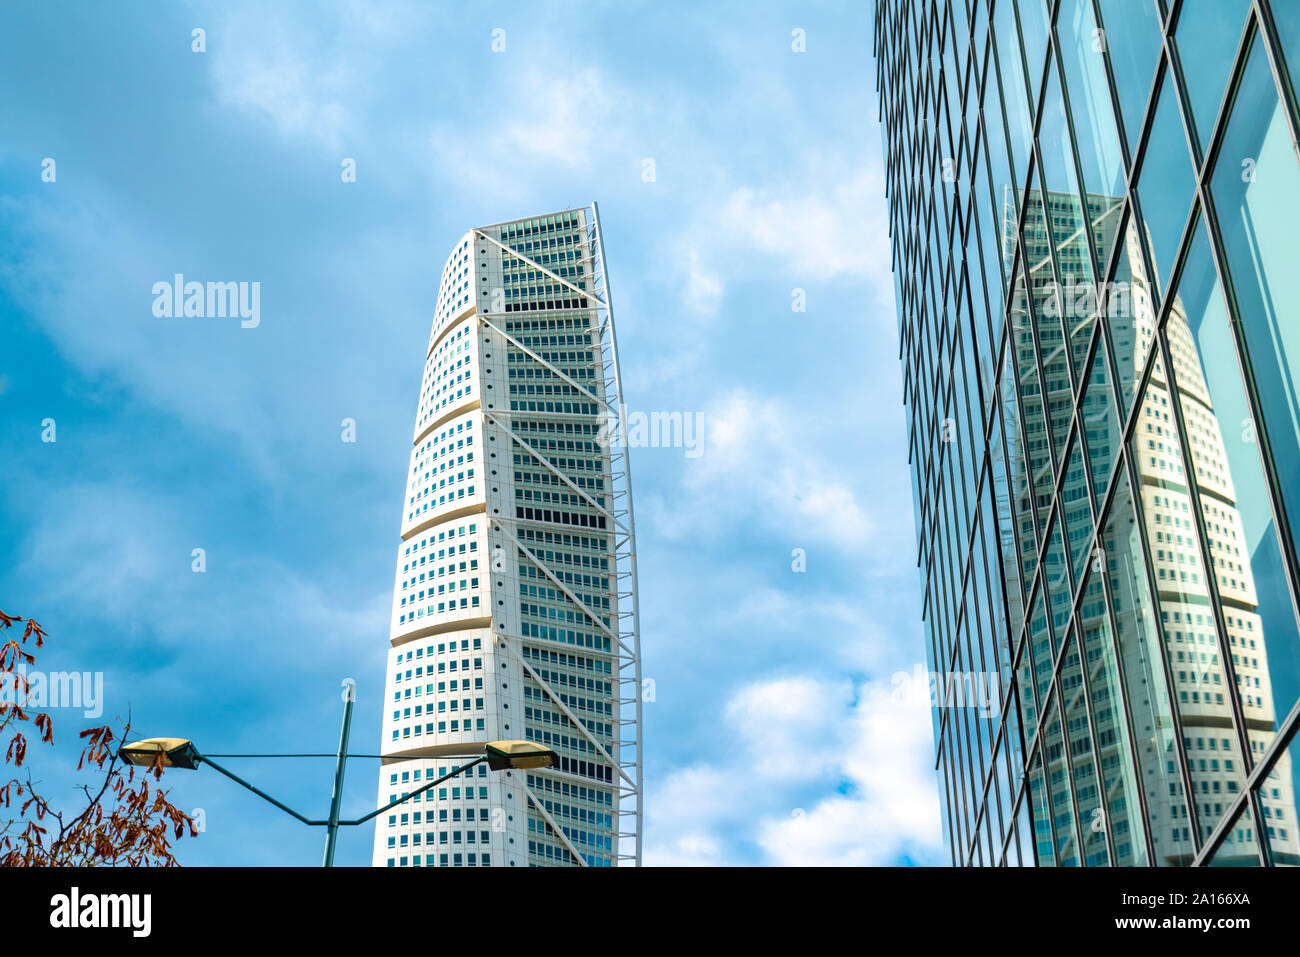 Low angle view of turning torso tower reflecting on glass building against sky Stock Photo